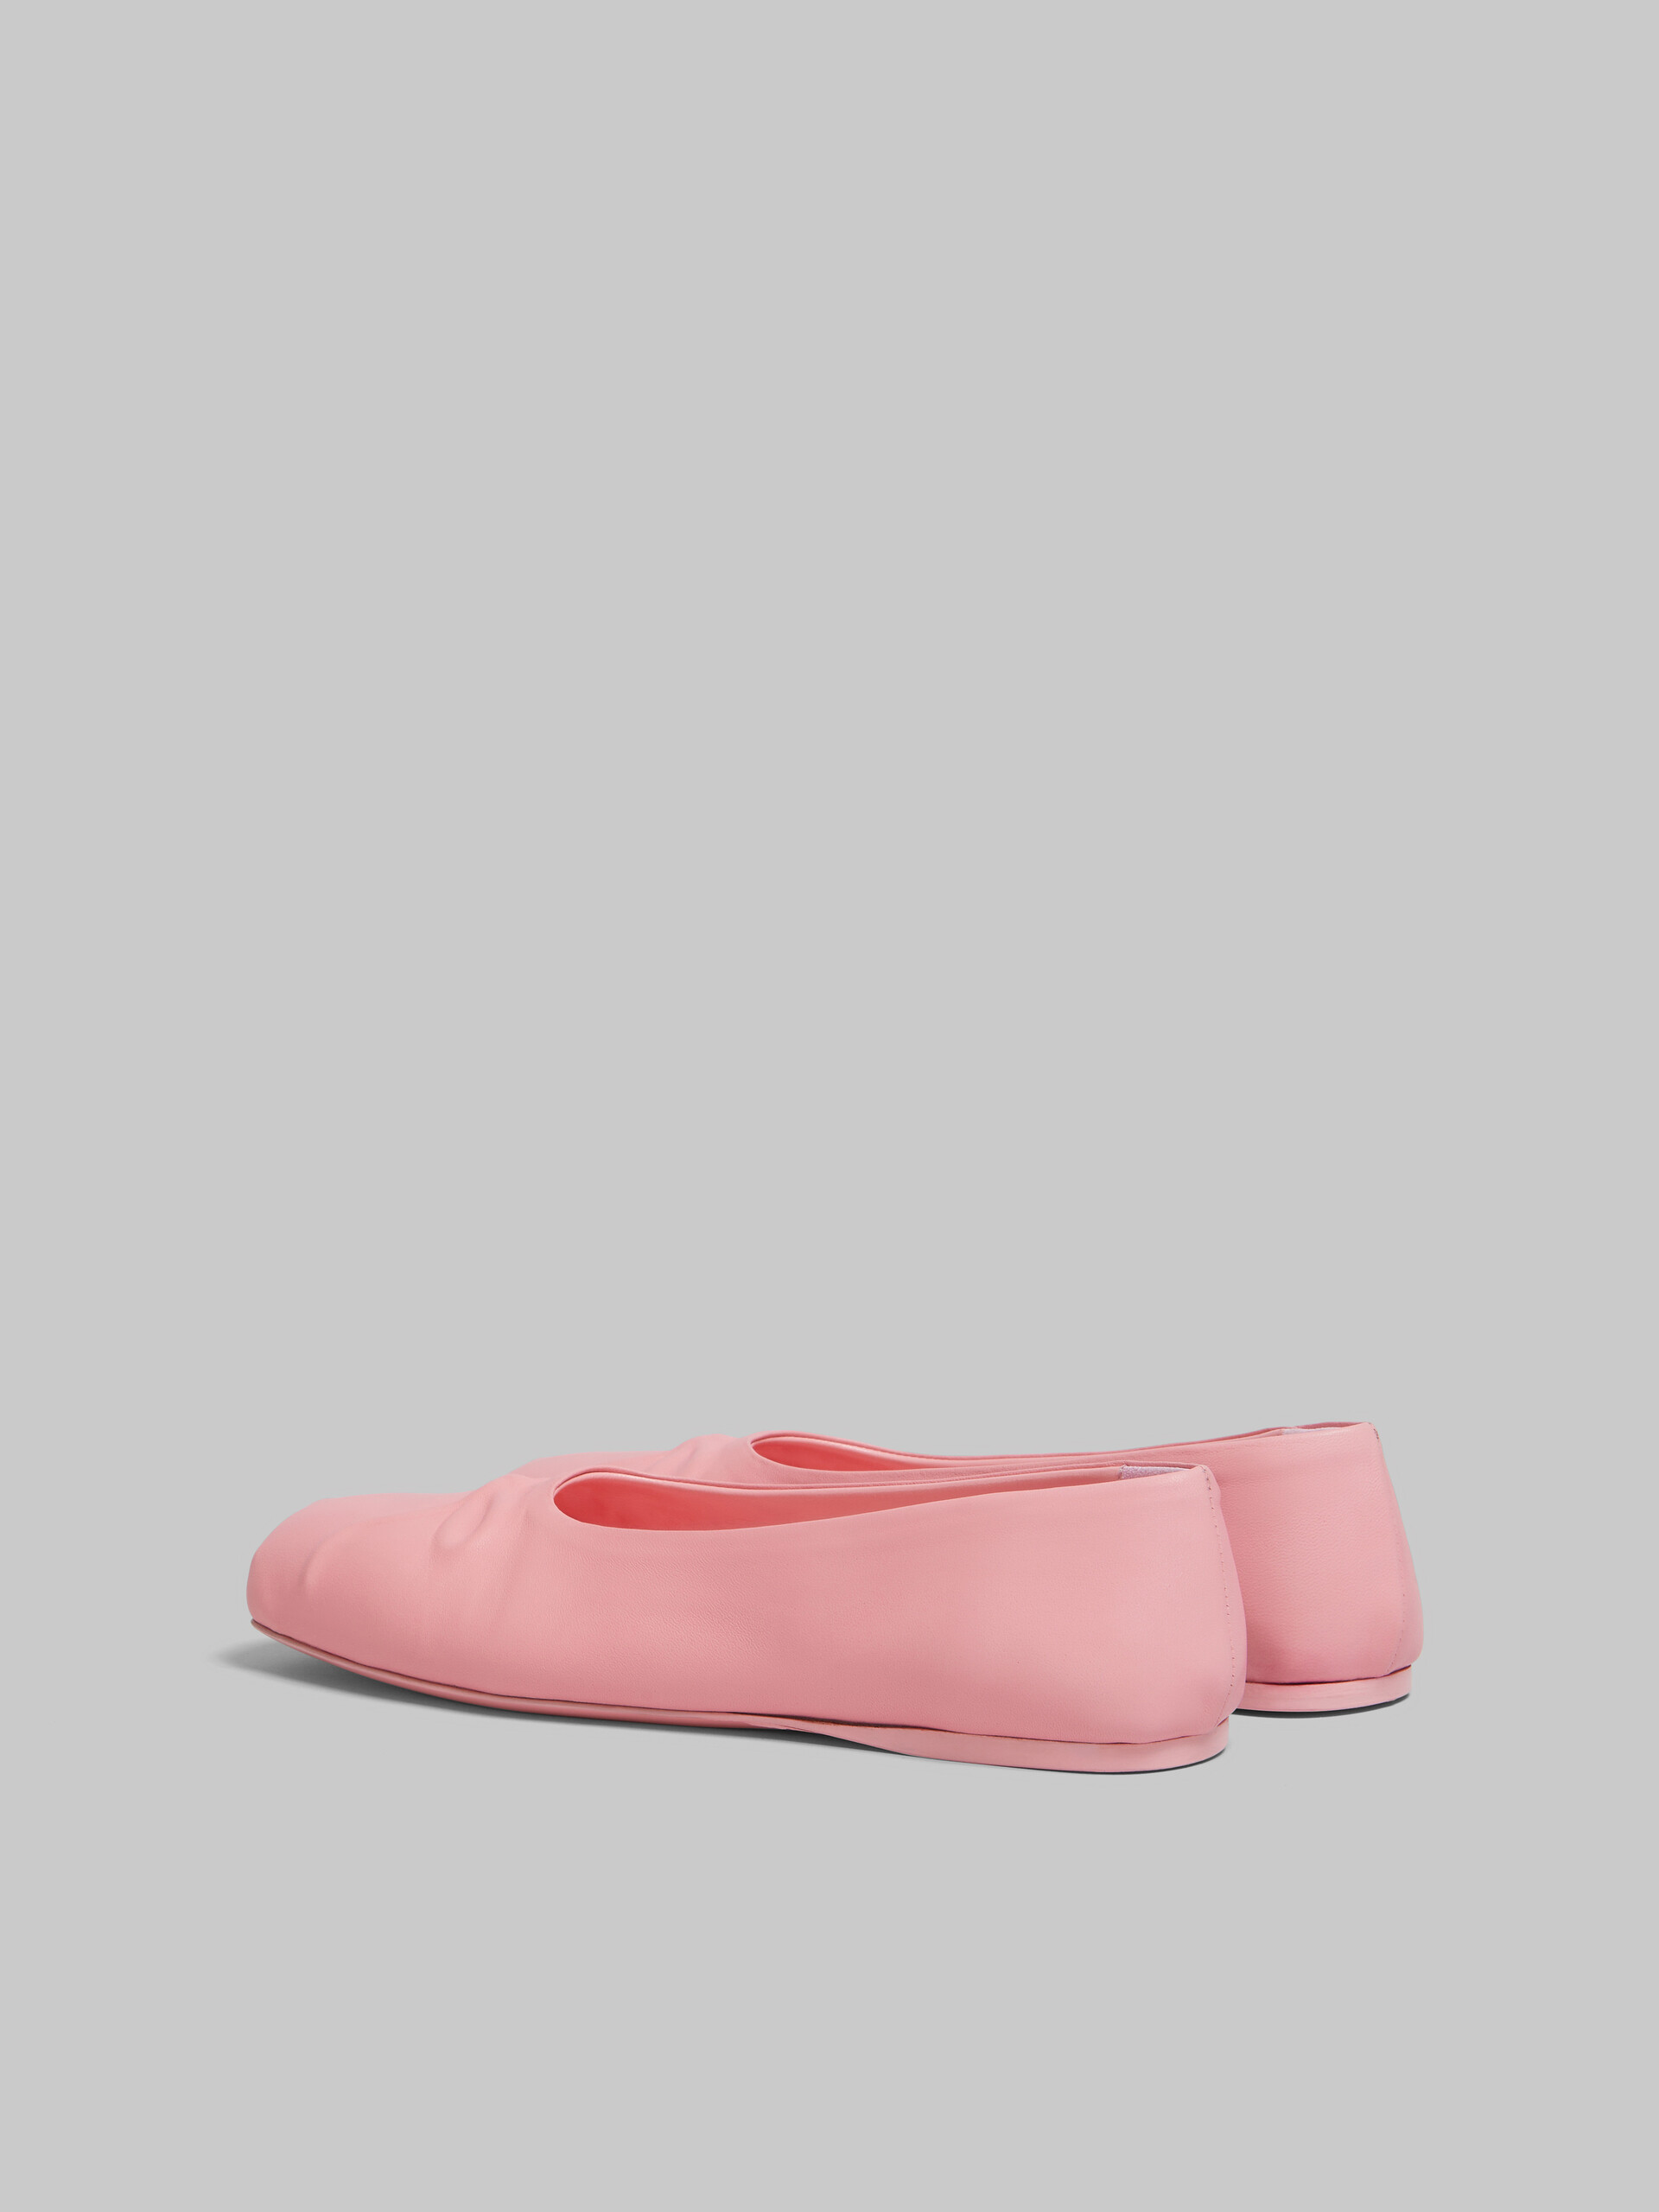 Pink nappa leather seamless Little Bow ballet flat - Ballet Shoes - Image 3